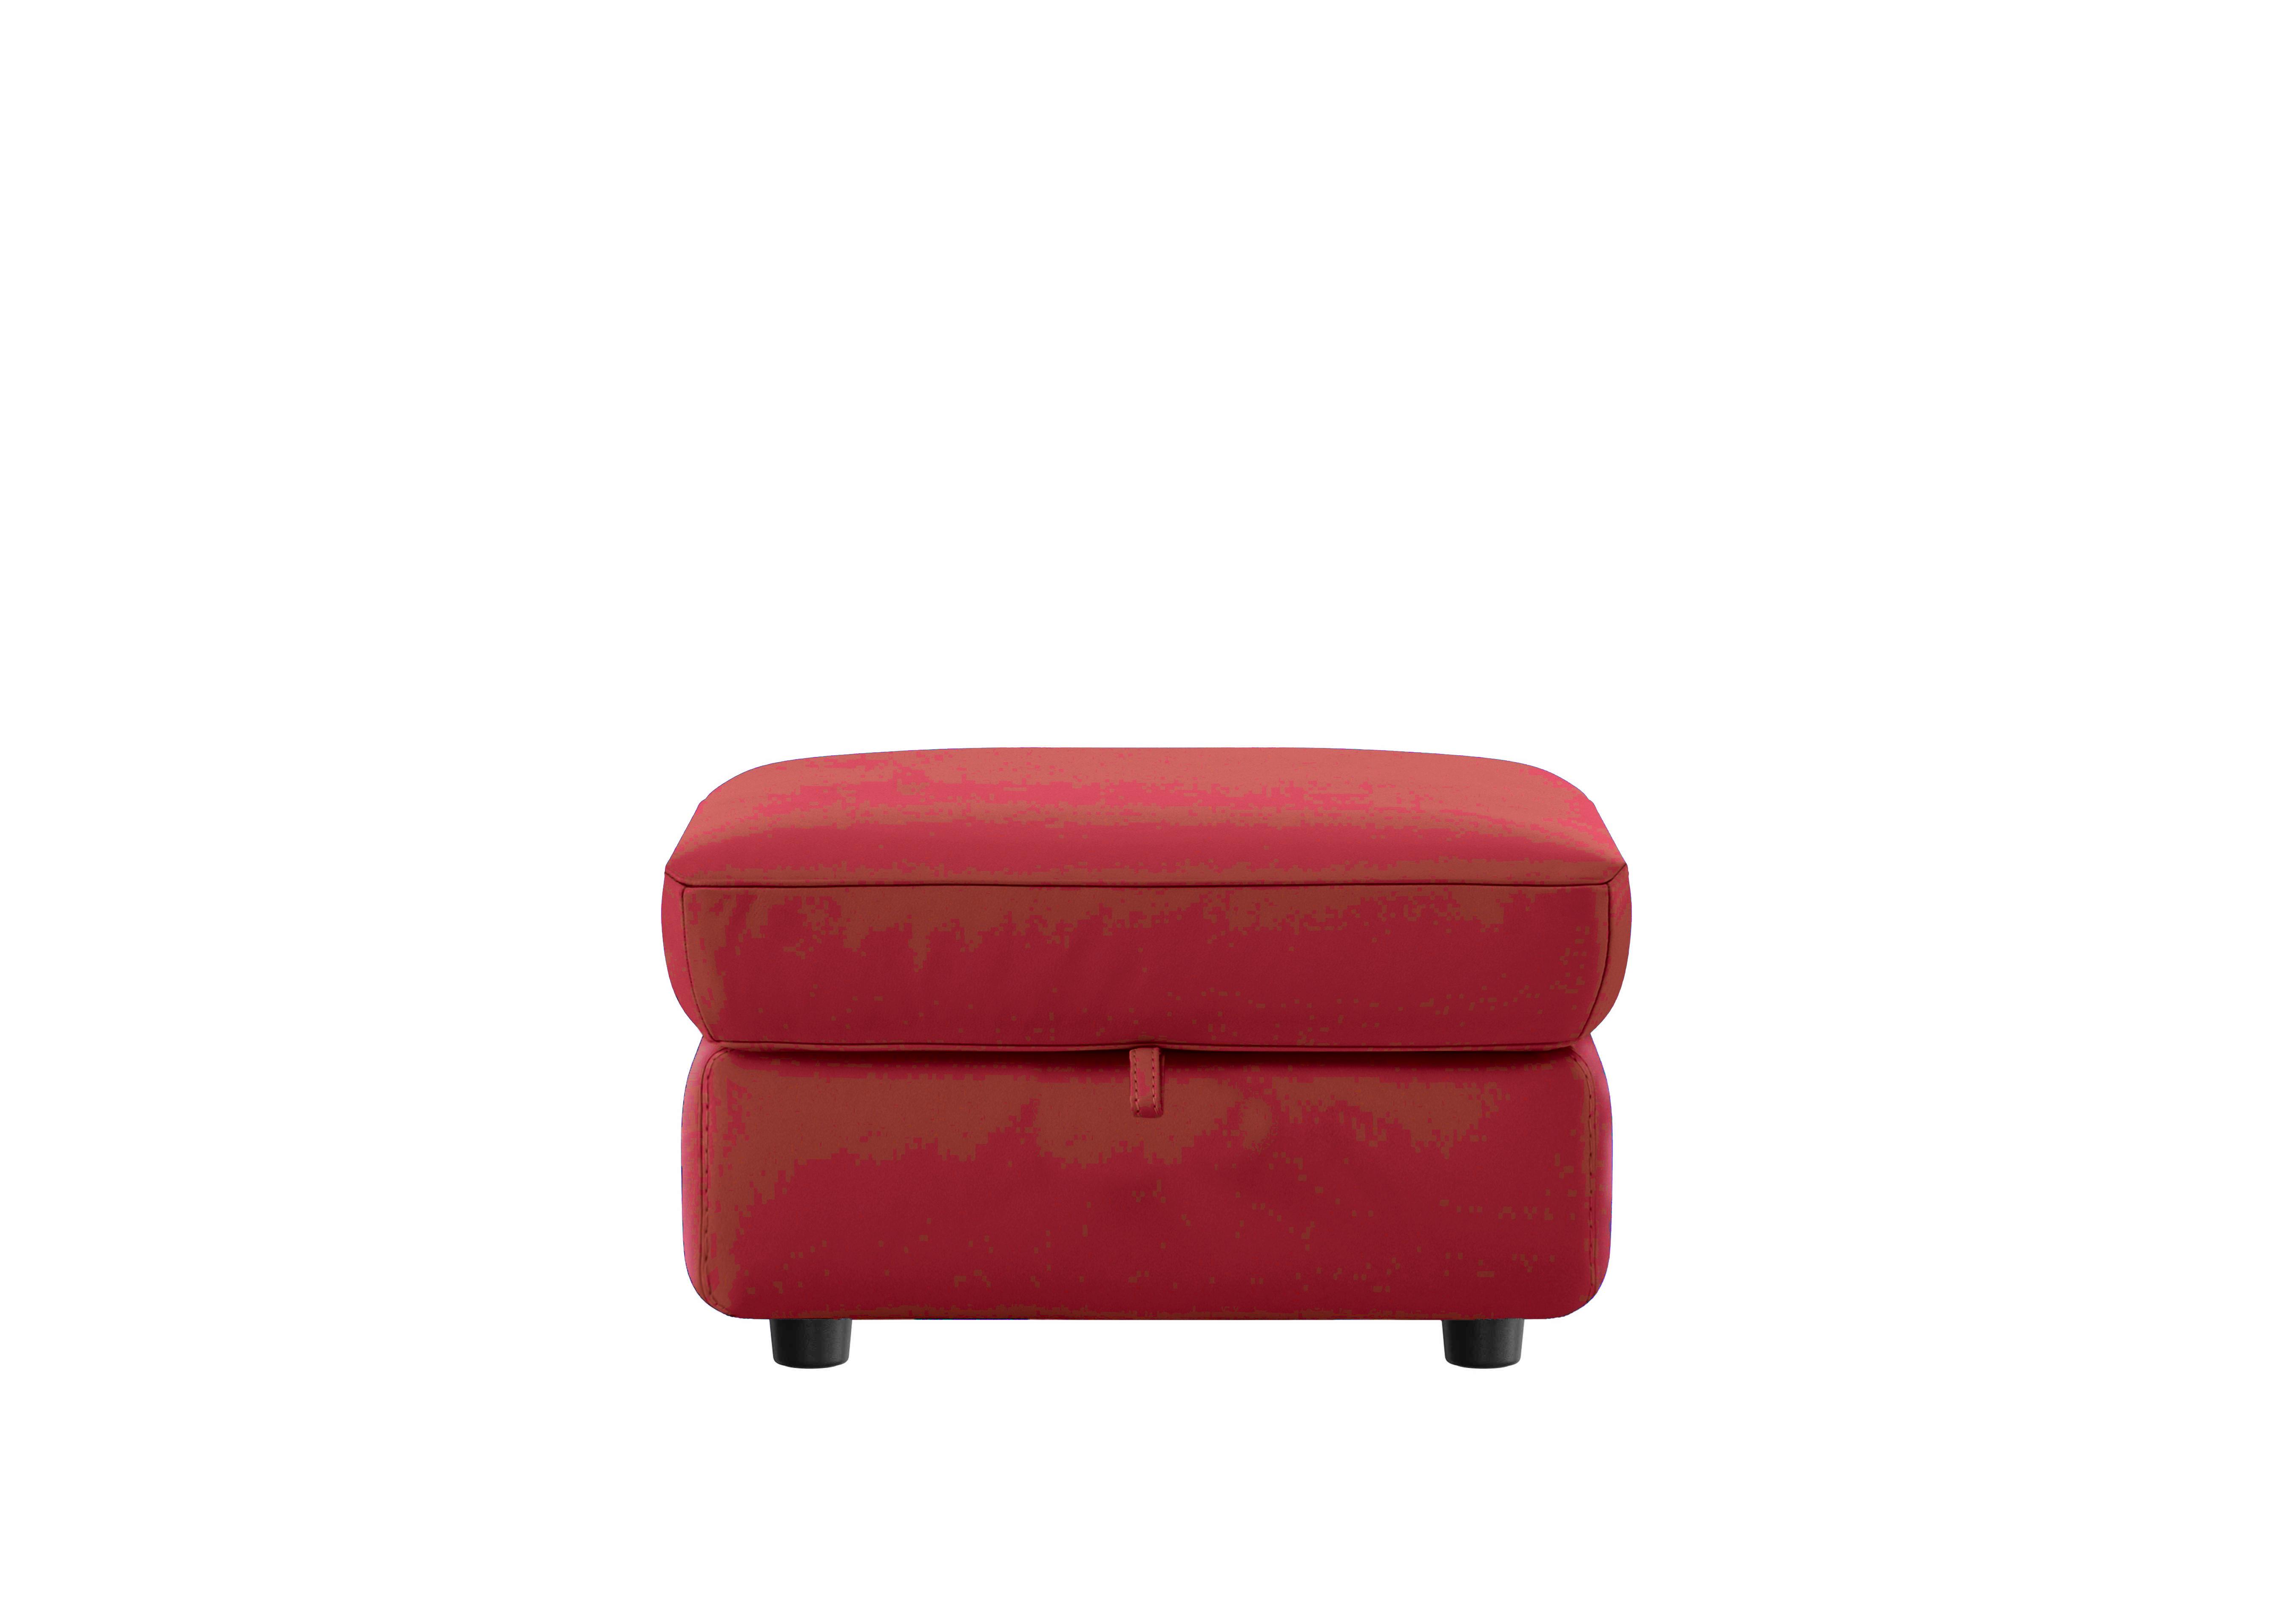 Compact Collection Piccolo Leather Storage Footstool in Bv-0008 Pure Red on Furniture Village